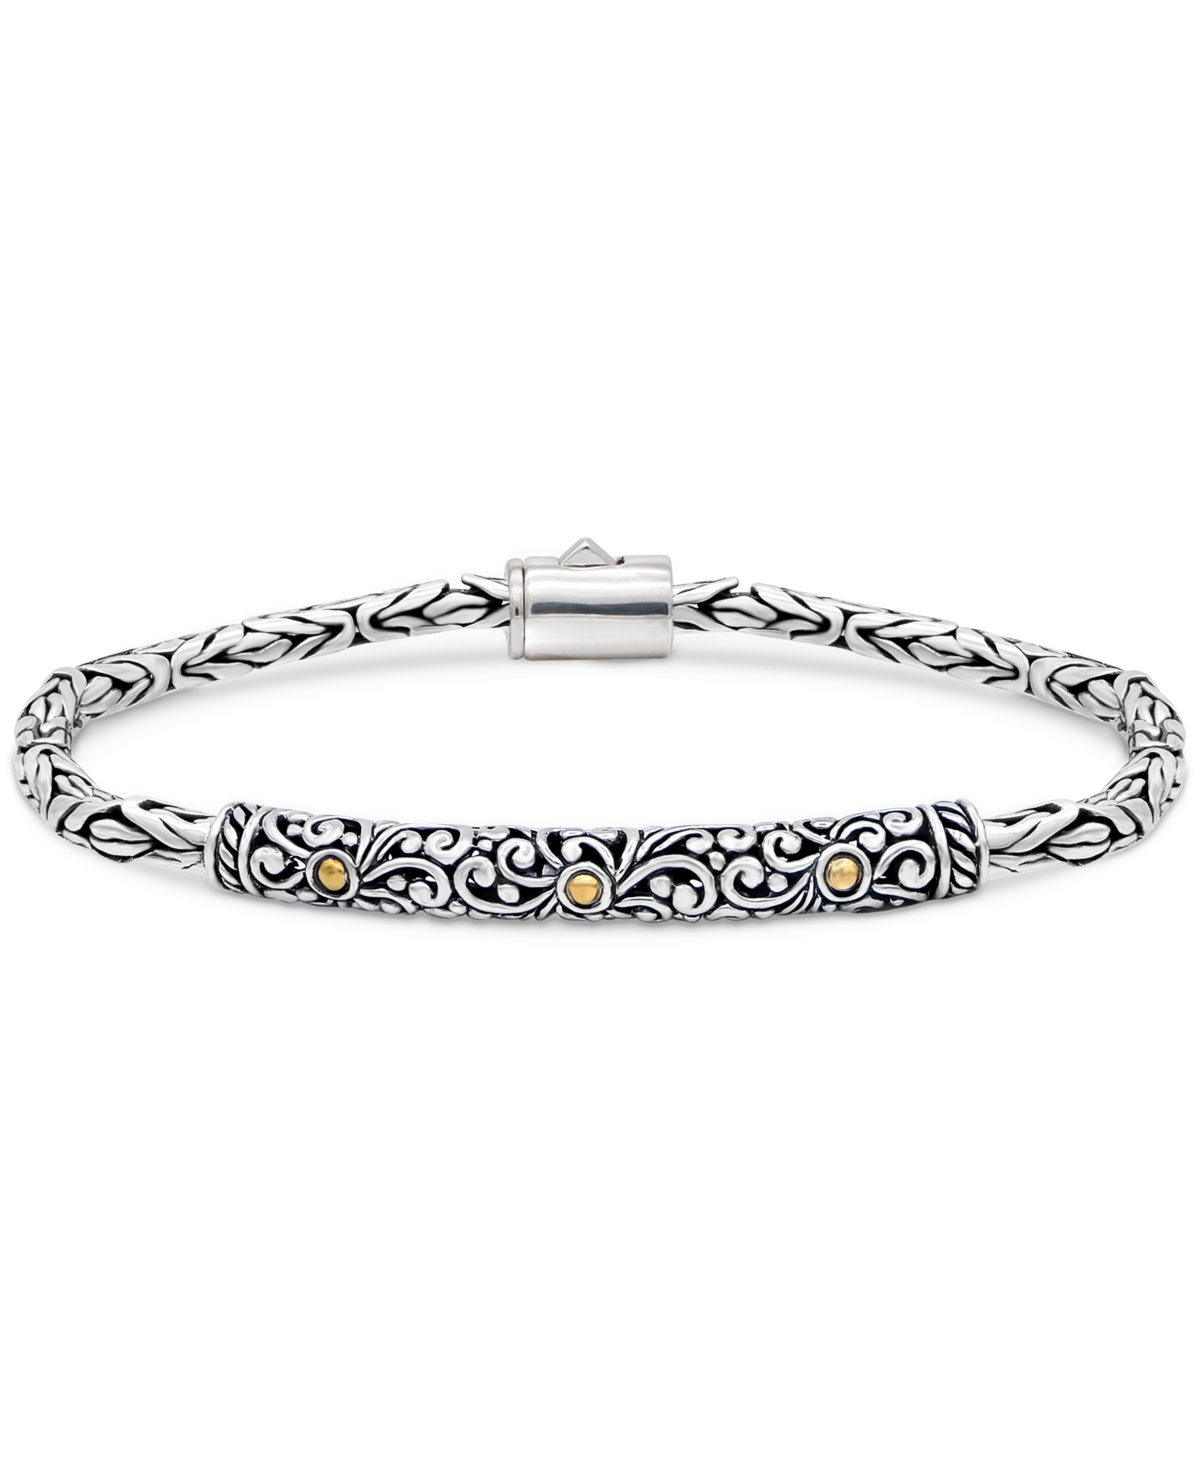 Bali Filigree with Borobudur Chain Bracelet in Sterling Silver and 18K Gold - Silver